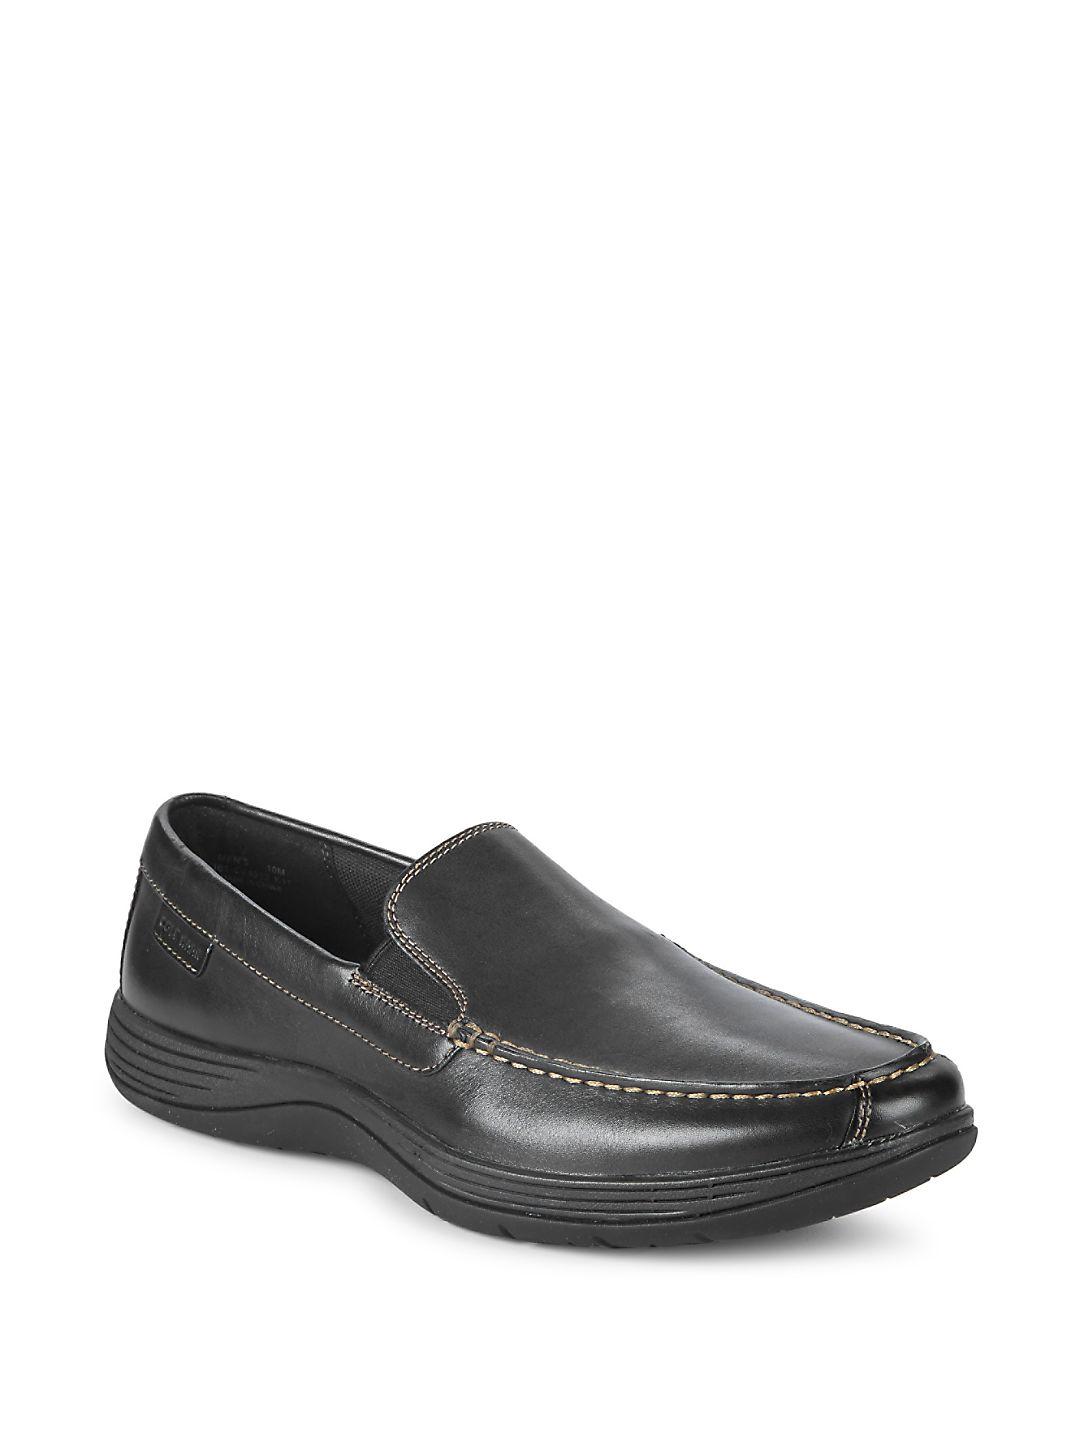 Cole Haan Lewiston Venetian Leather Loafers in Black for Men - Lyst